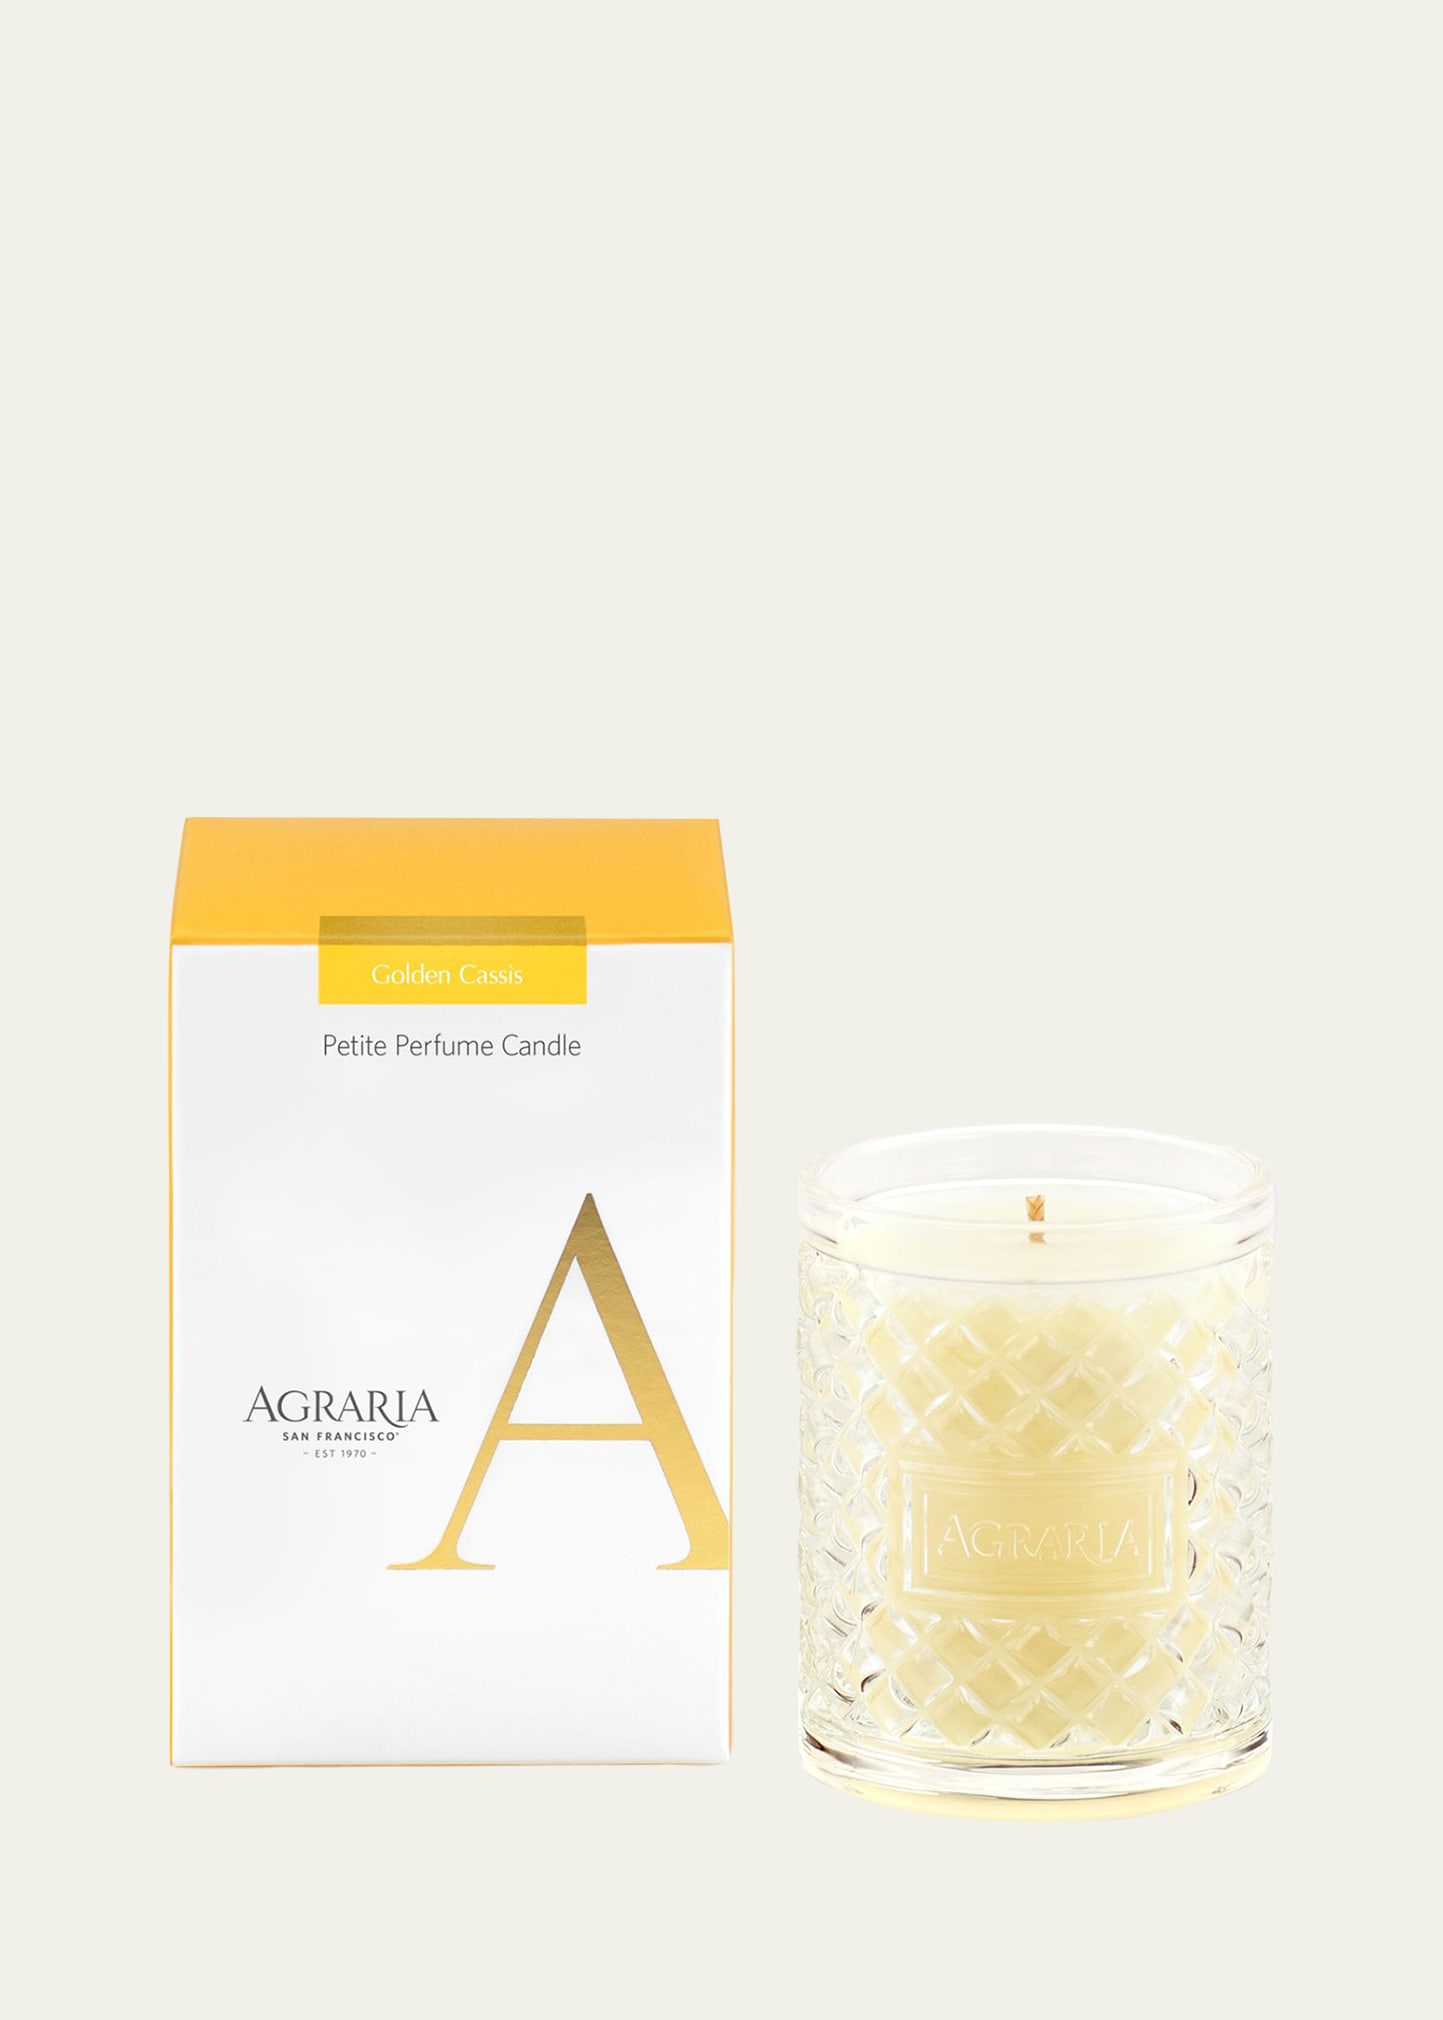 Agraria Golden Cassis Candle, 3.4 oz./ 96 g